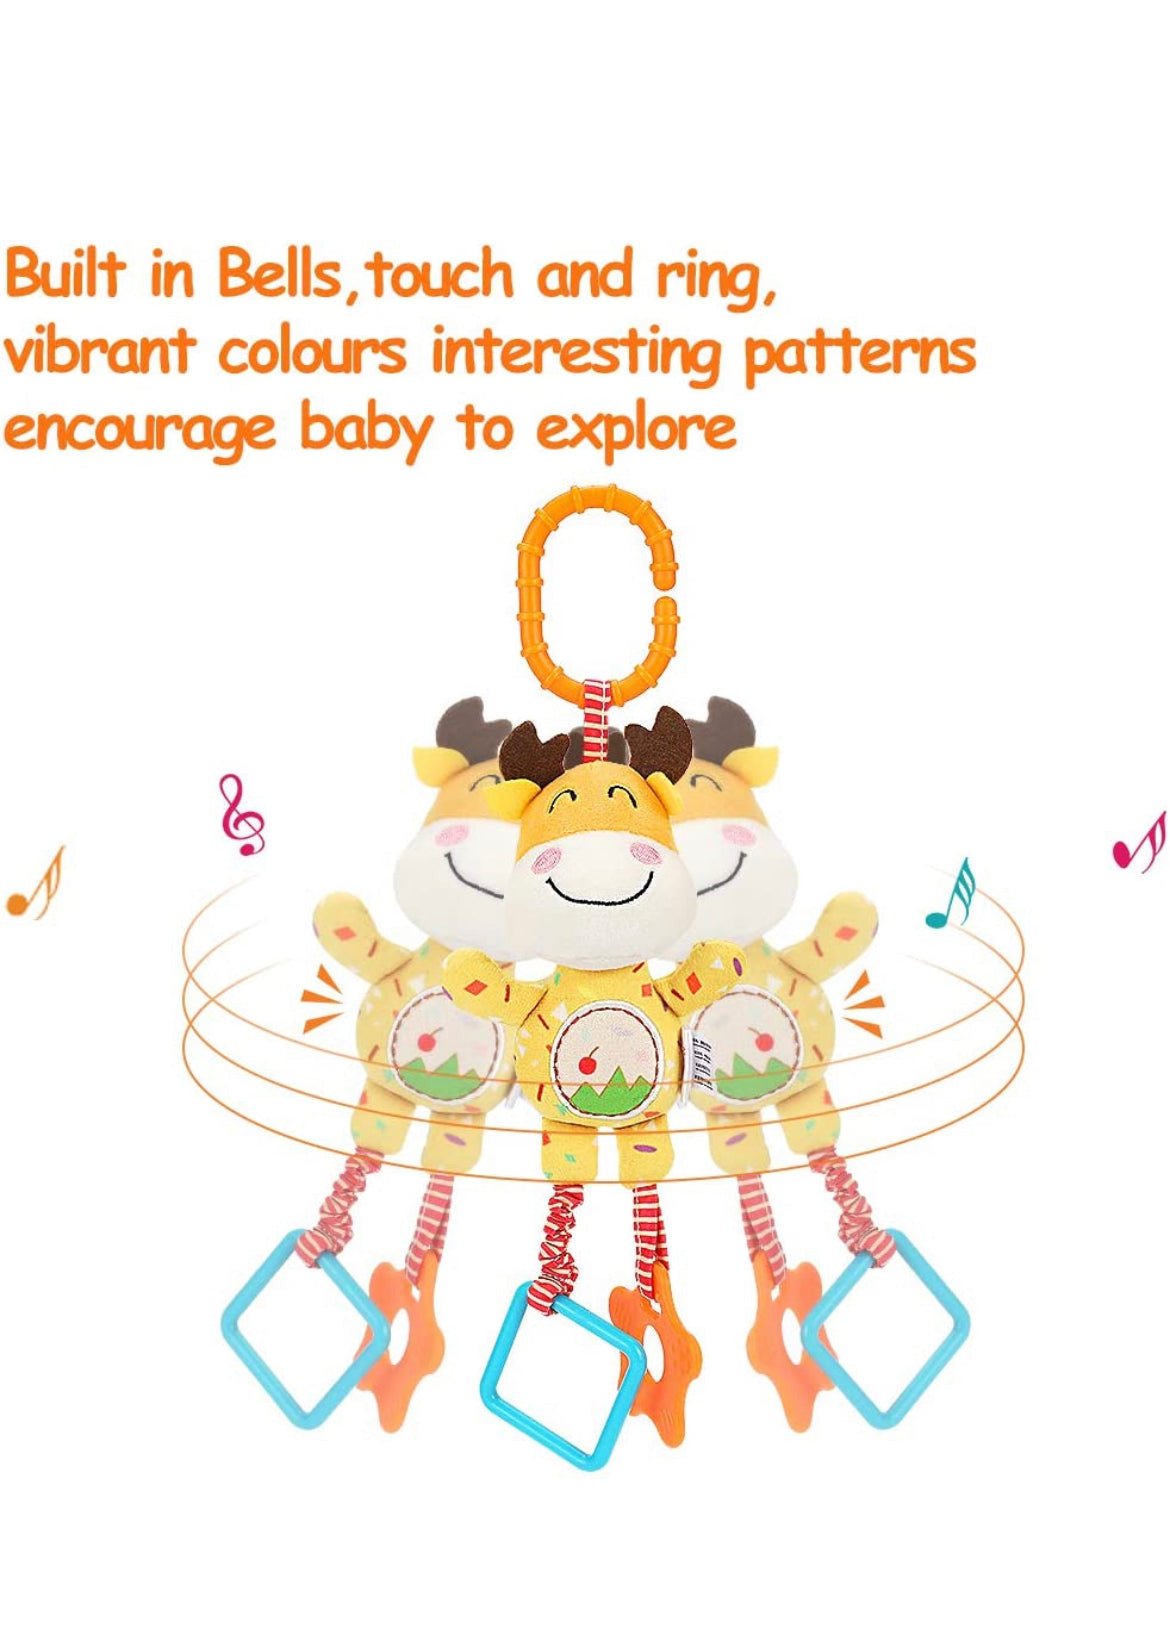 TUMAMA Baby Toys for 0, 3, 6, 9, 12 Months, Handbells Baby Rattles, Soft Plush Early Development Stroller Car Toys for Infant, 4 Pack.